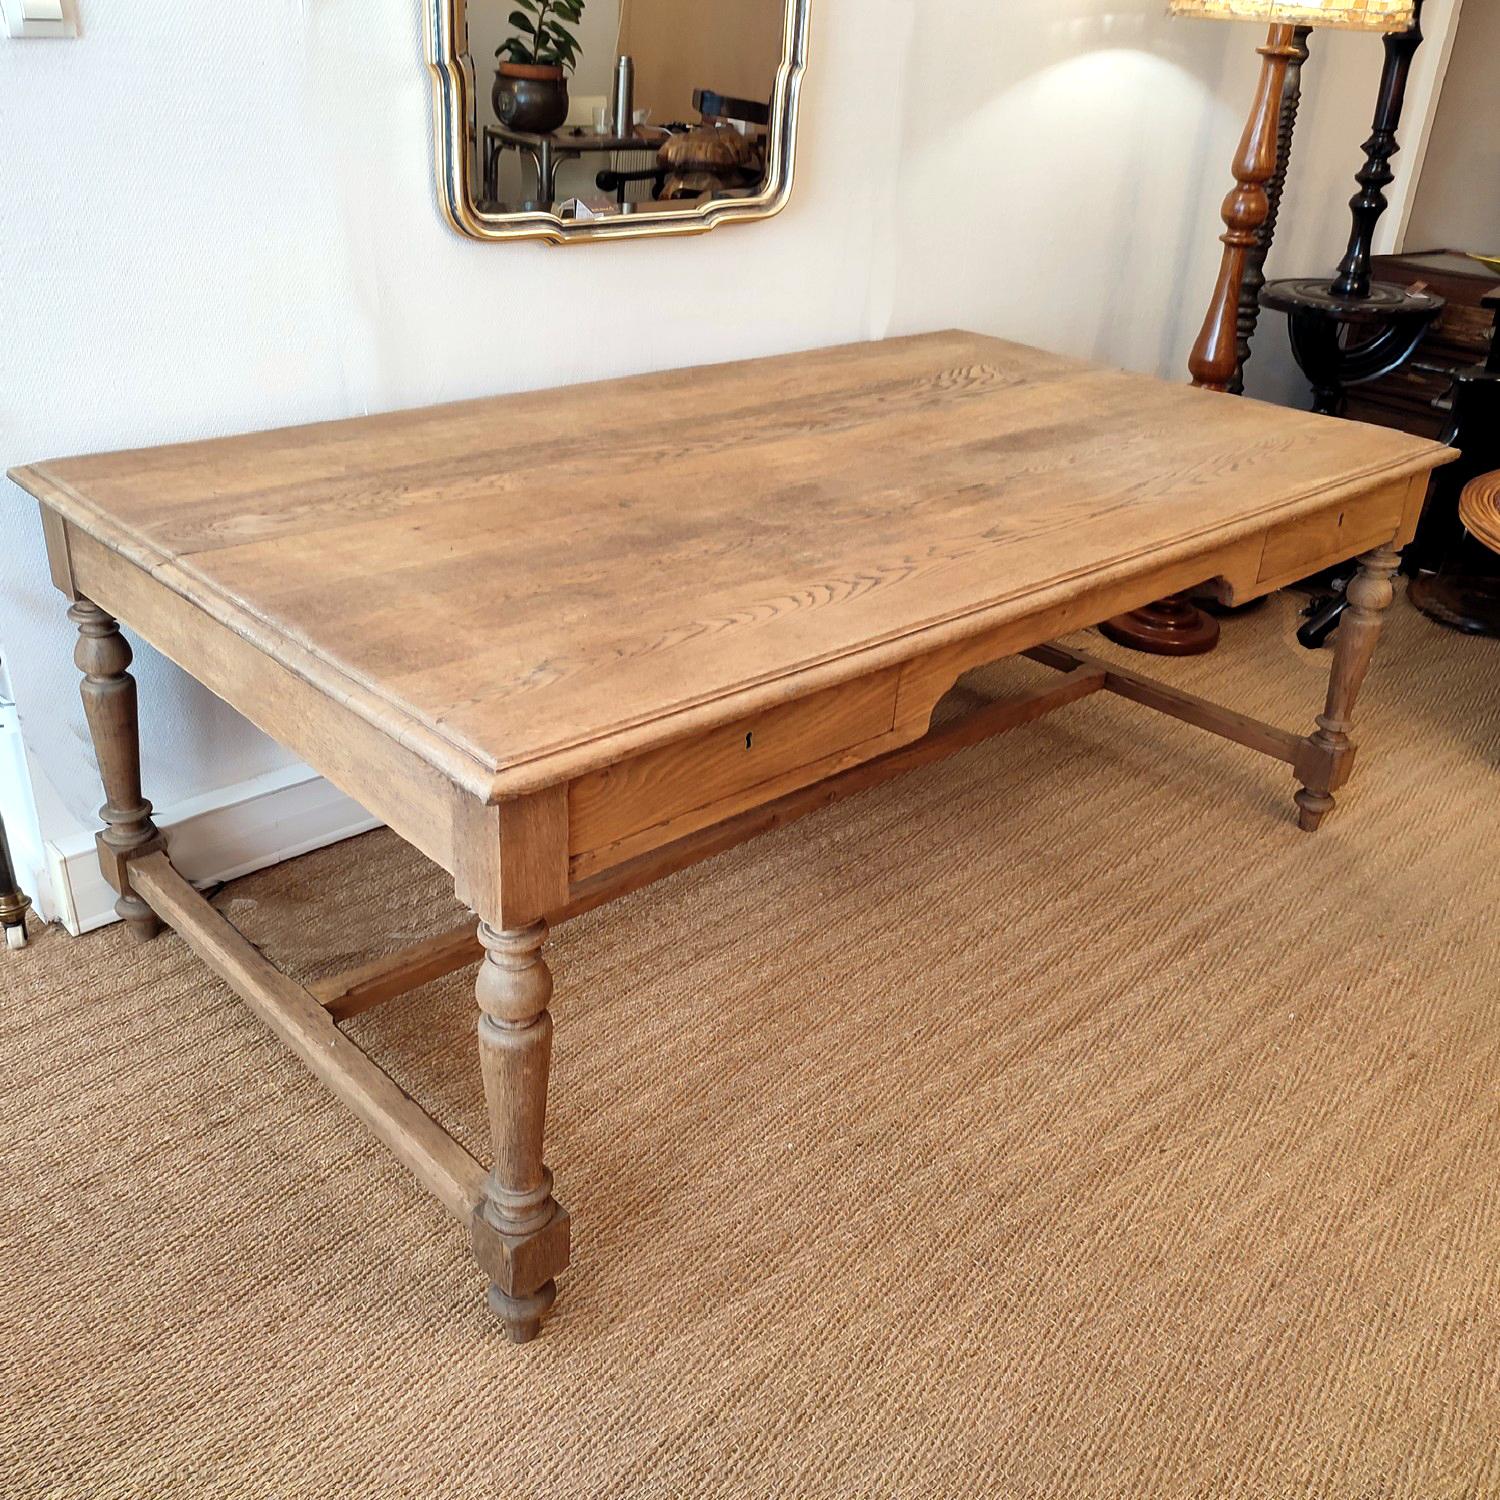 19th Century Large Neoclassical Solid Oak French Desk with 2 Drawers